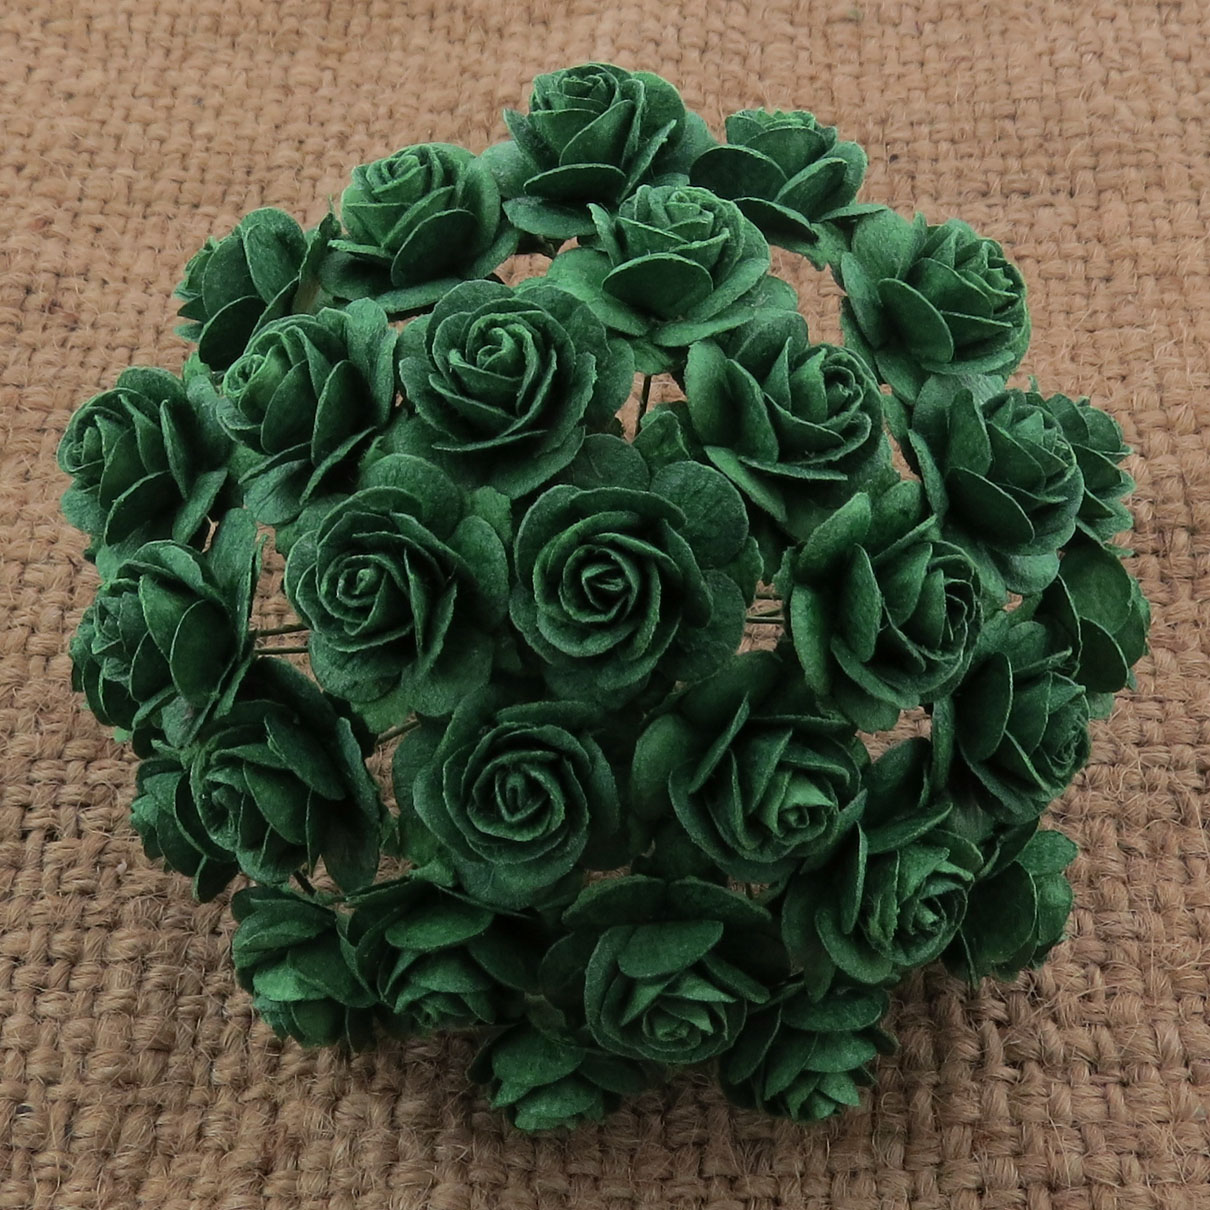 100 OLIVE GREEN MULBERRY PAPER OPEN ROSES